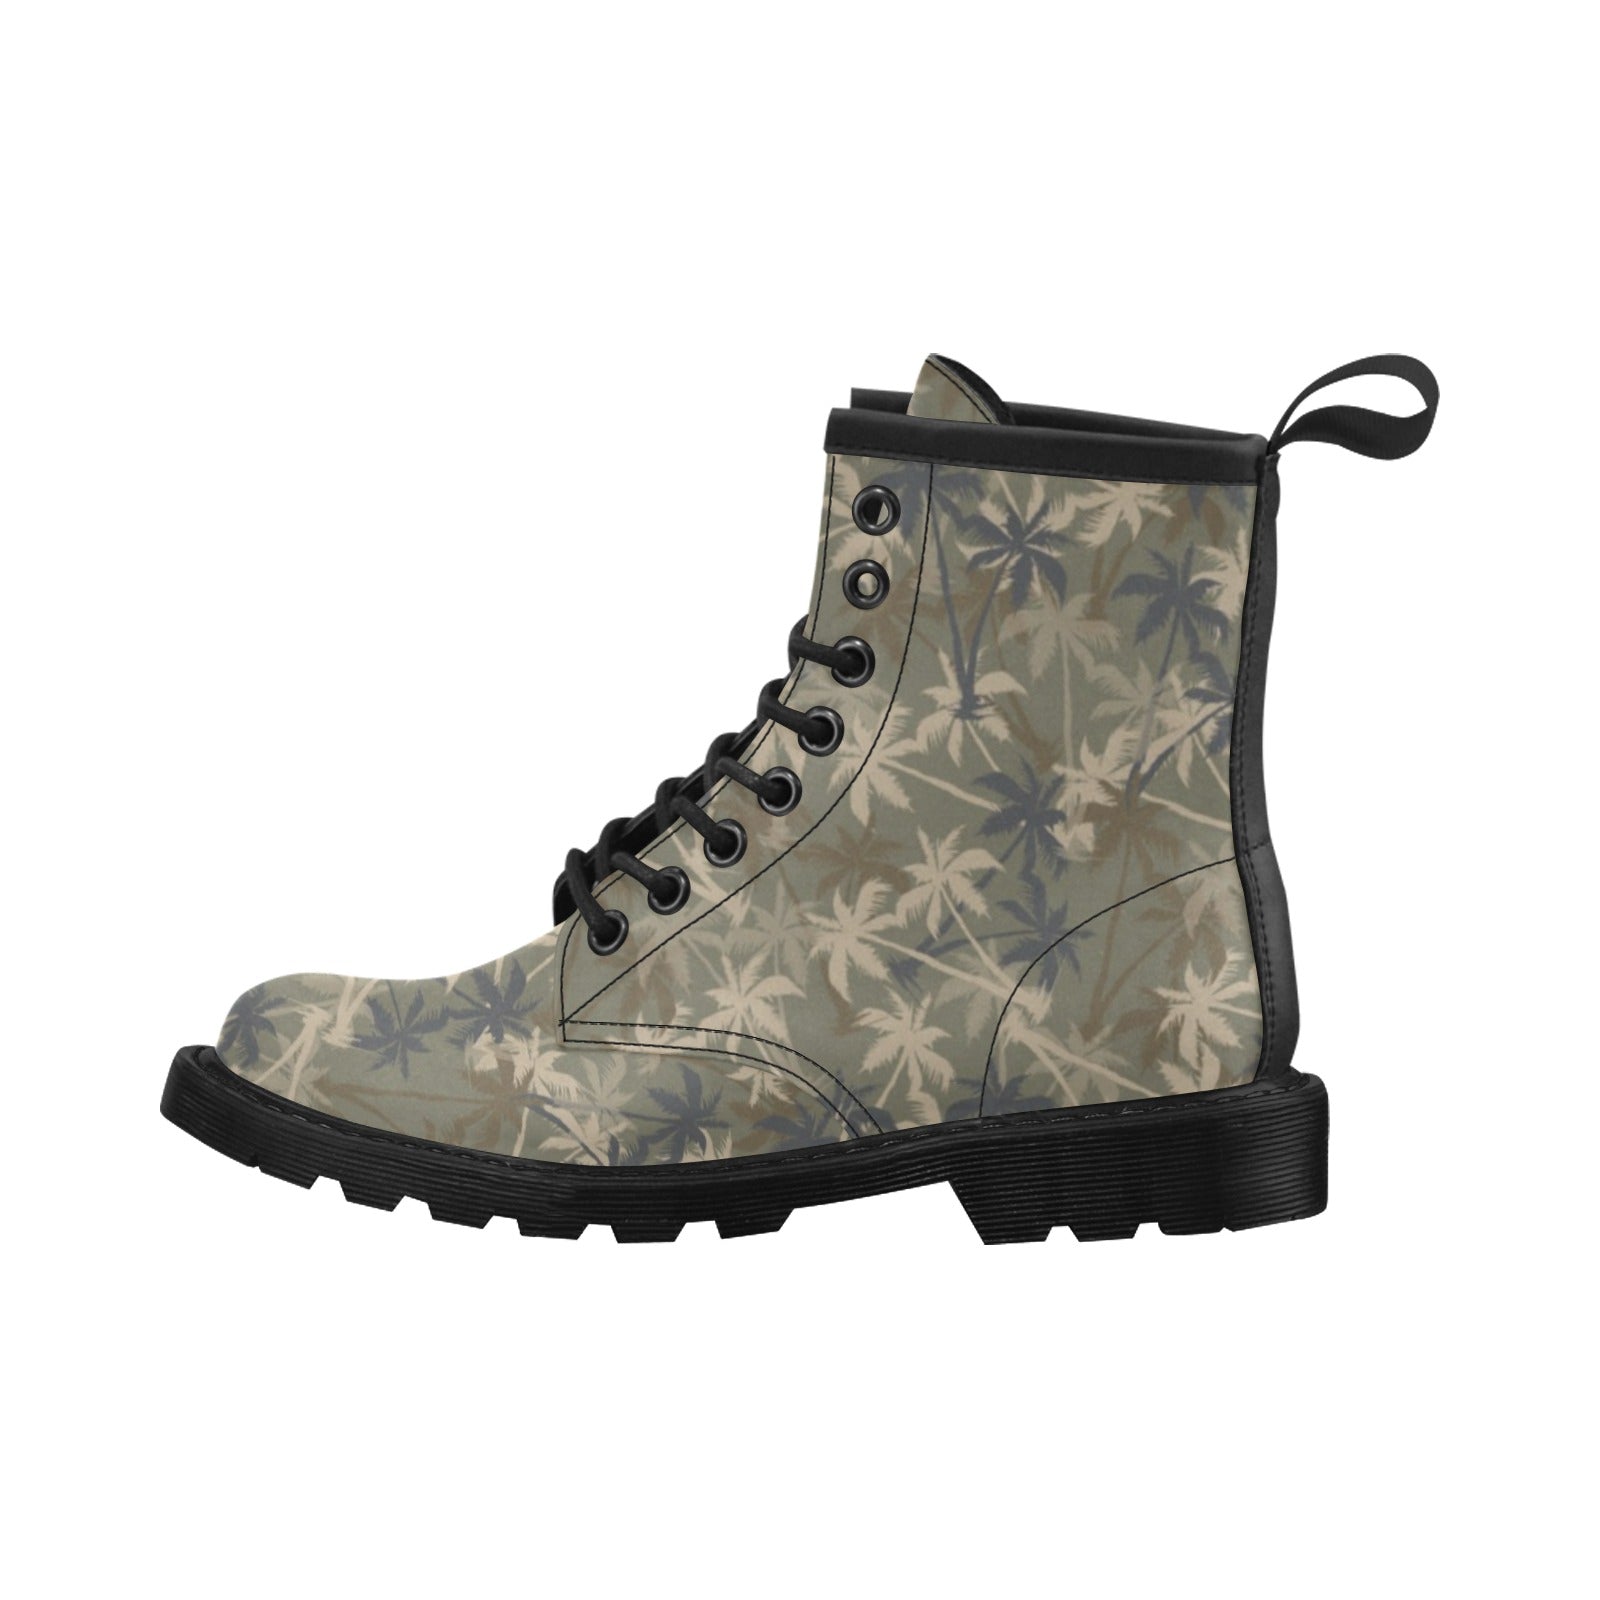 Palm Tree camouflage Women's Boots